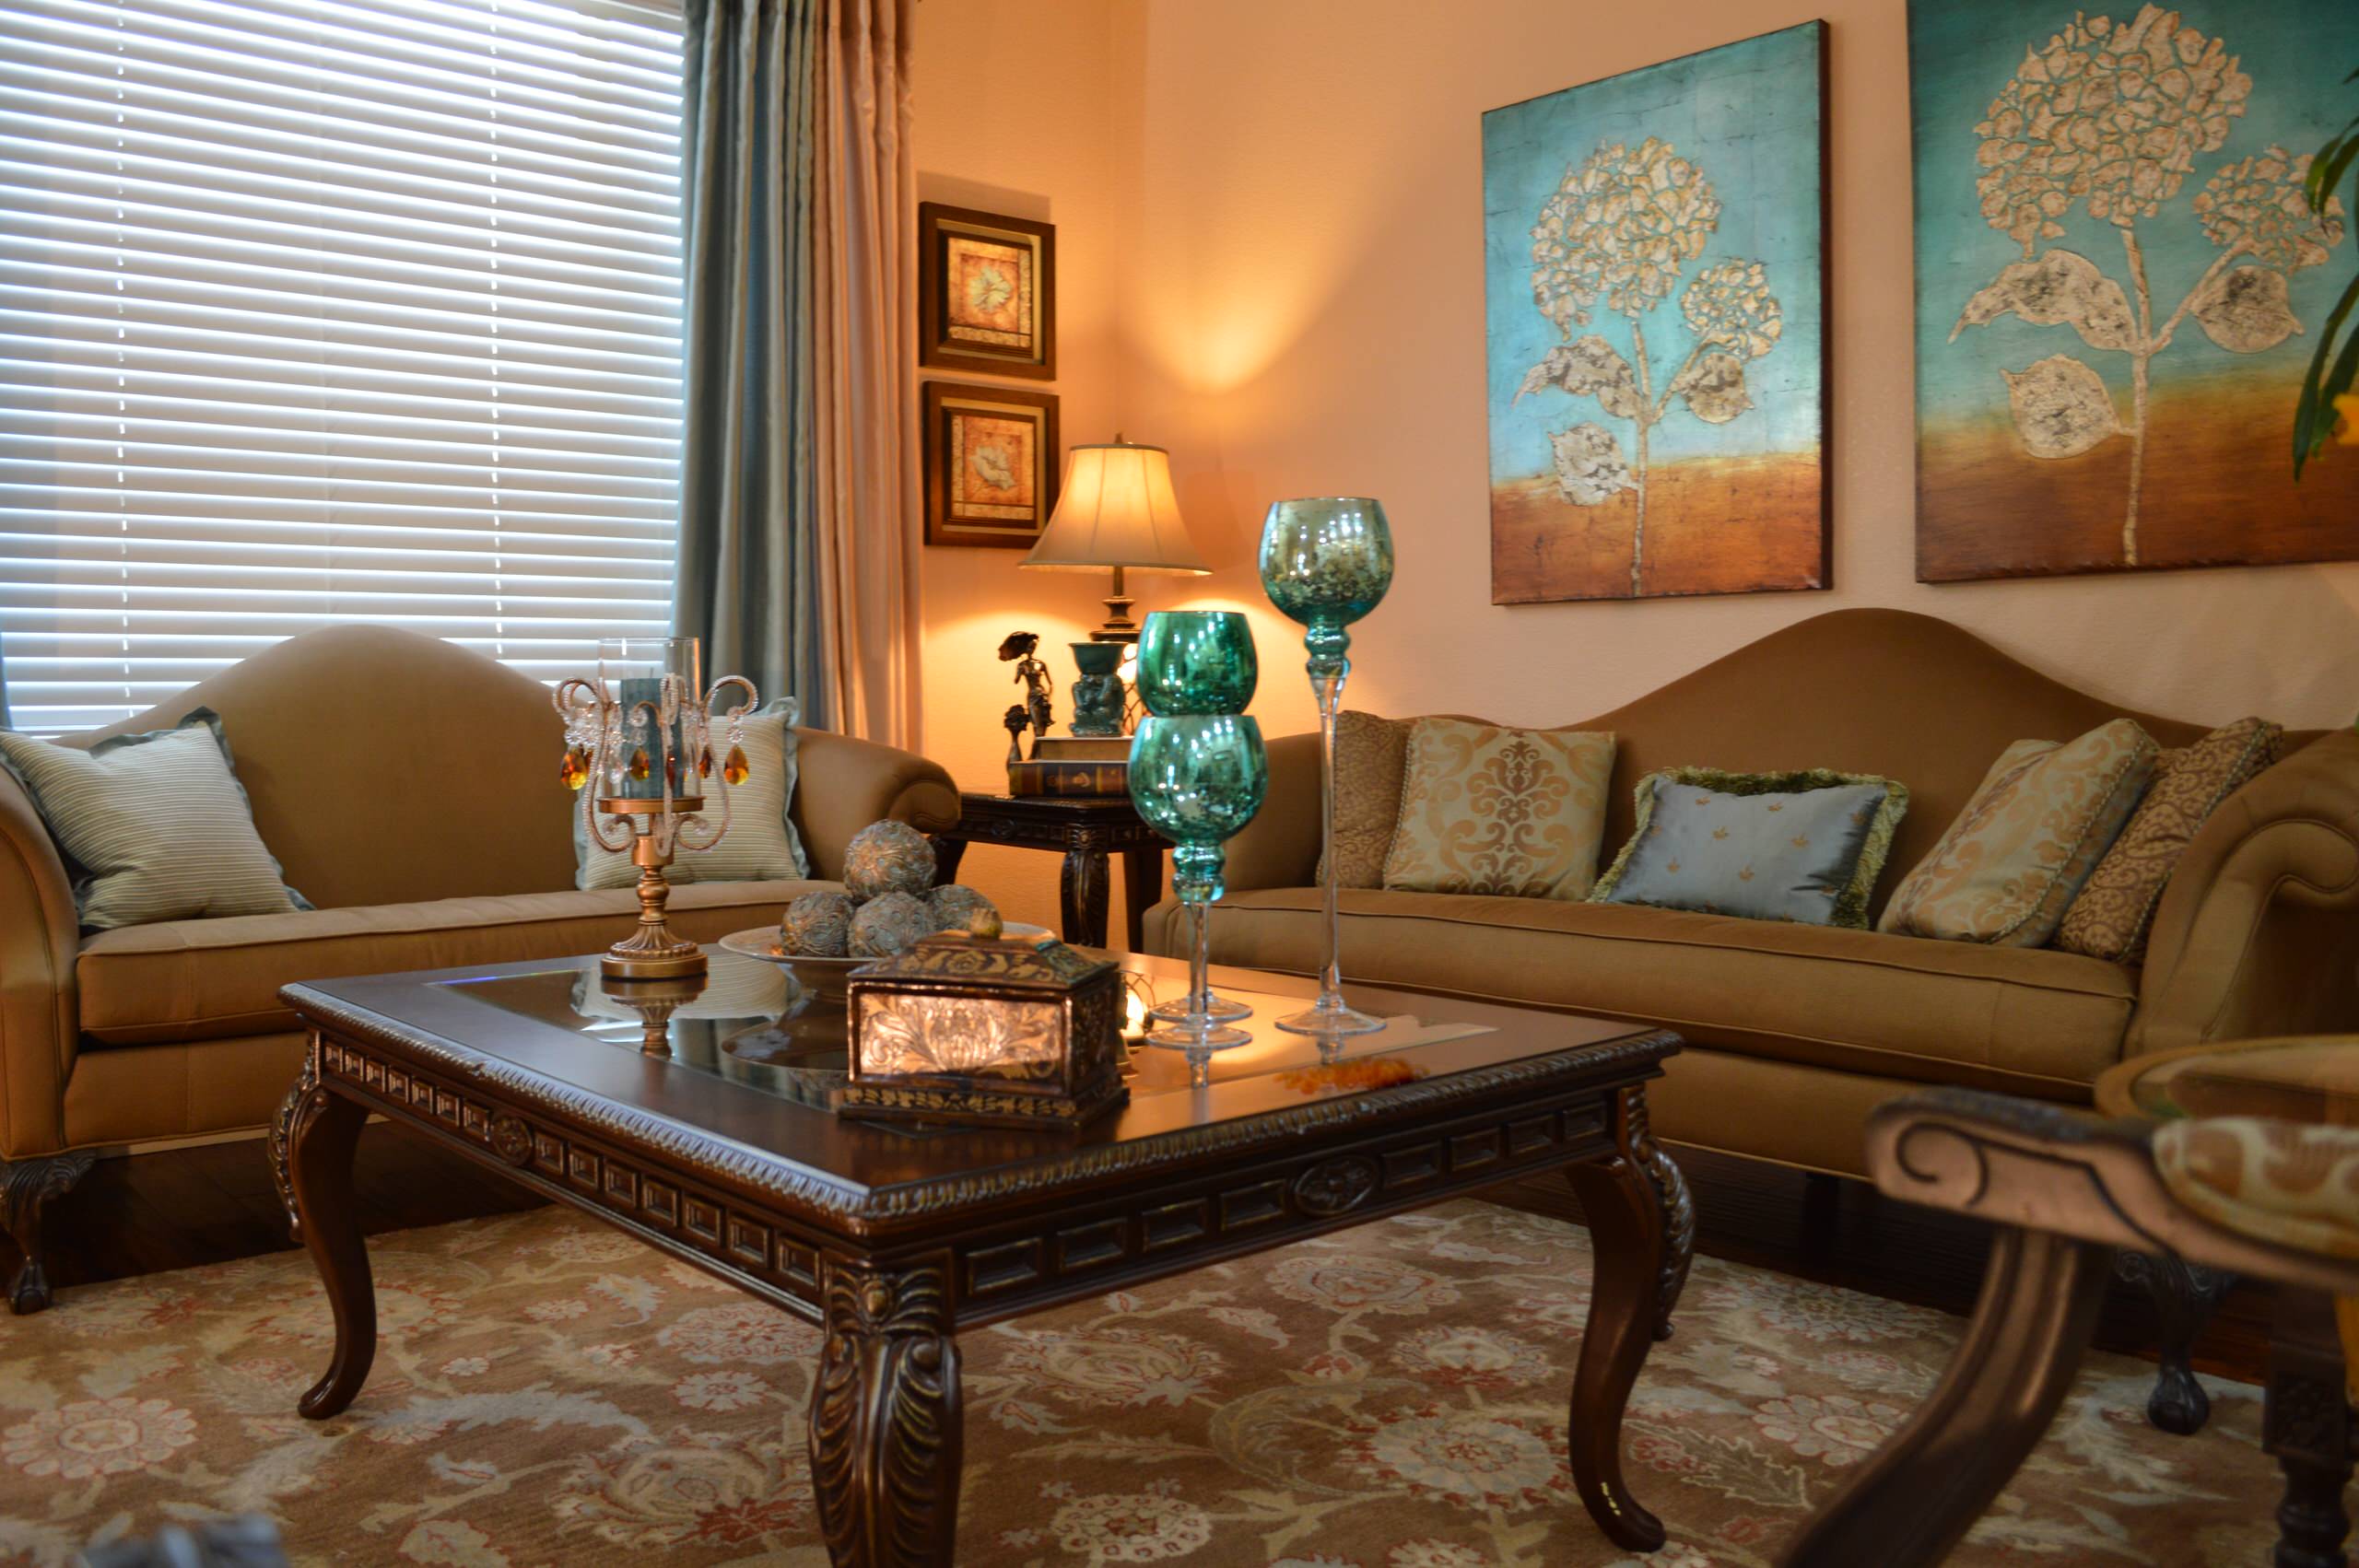 brown and teal - photos & ideas | houzz